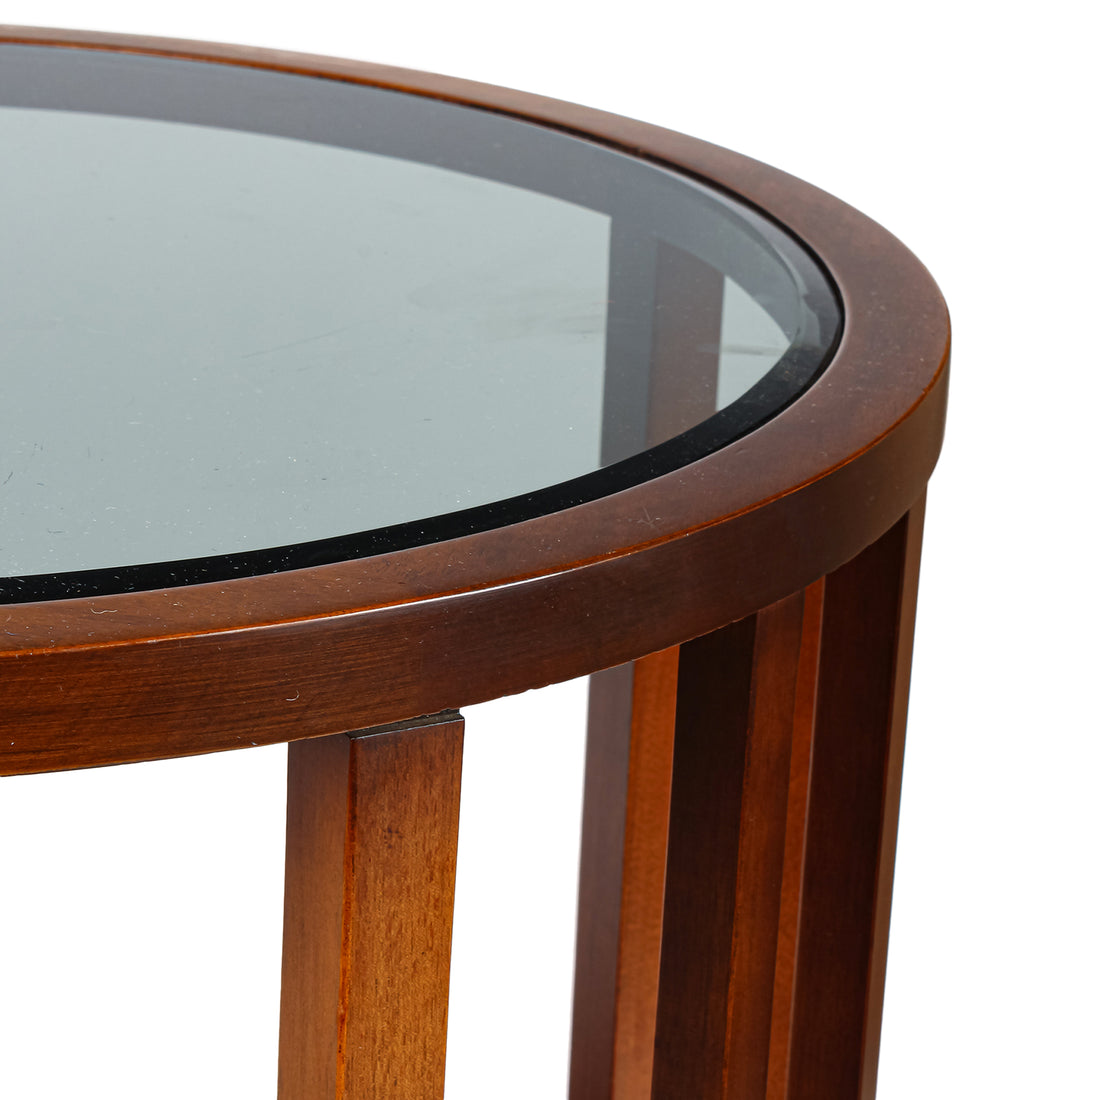 Vintage Round Walnut Midcentury Modern Table with Smoked Glass Top